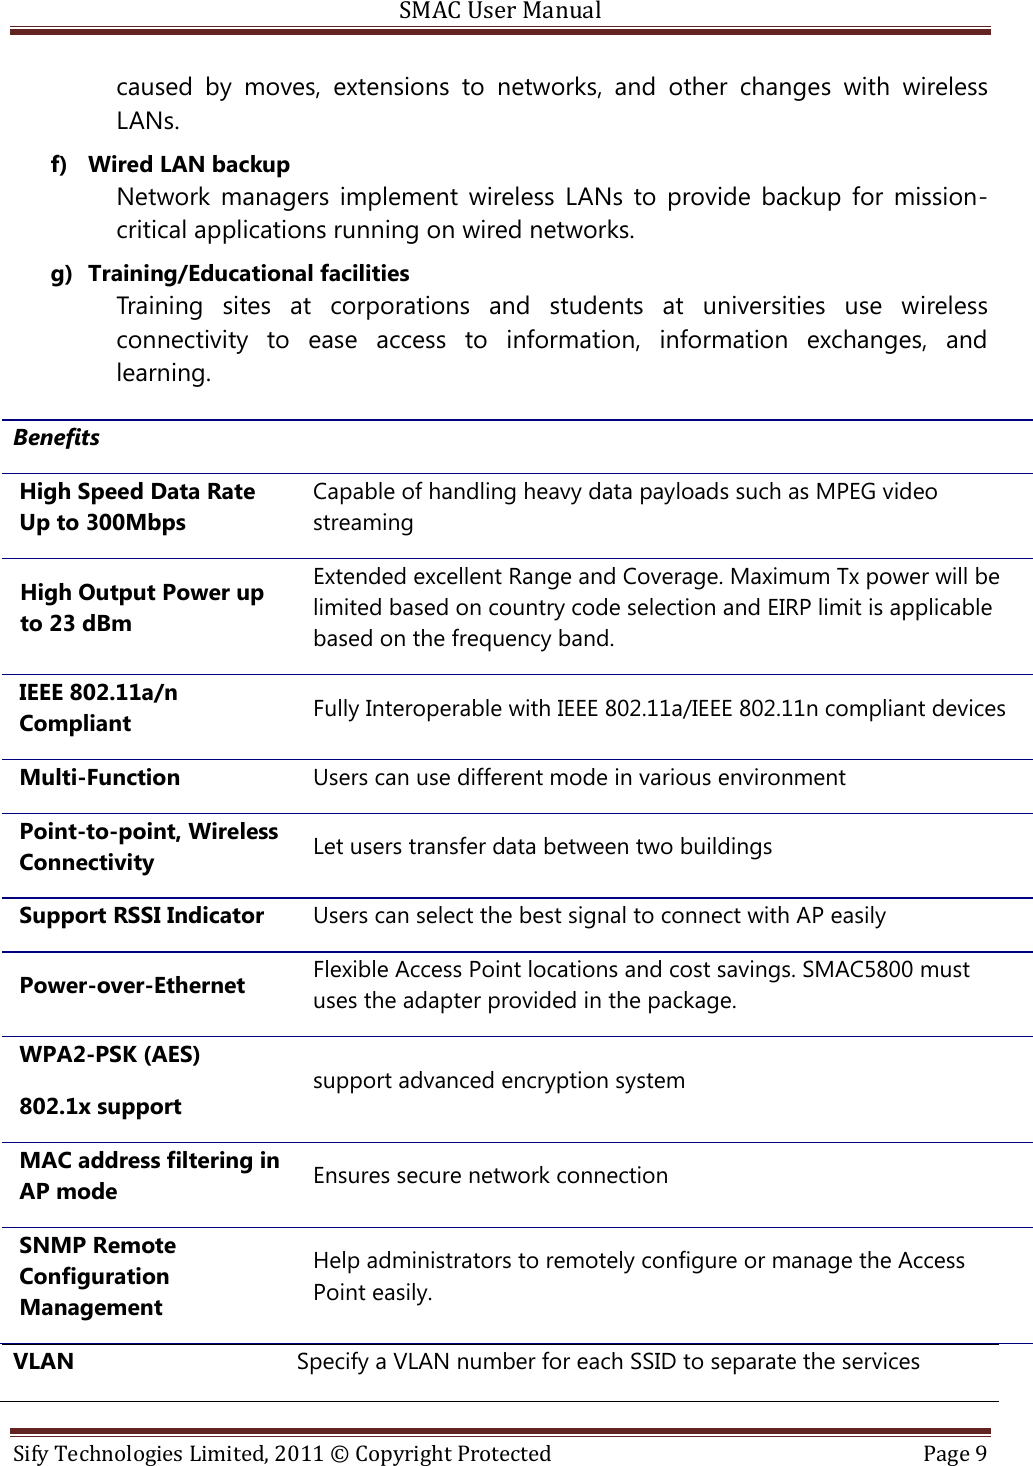 SMAC User Manual  Sify Technologies Limited, 2011 © Copyright Protected  Page 9  caused  by  moves,  extensions  to  networks,  and  other  changes  with  wireless LANs. f) Wired LAN backup Network  managers  implement  wireless  LANs  to  provide  backup  for  mission-critical applications running on wired networks. g) Training/Educational facilities Training  sites  at  corporations  and  students  at  universities  use  wireless connectivity  to  ease  access  to  information,  information  exchanges,  and learning. VLAN Specify a VLAN number for each SSID to separate the services Benefits High Speed Data Rate Up to 300Mbps Capable of handling heavy data payloads such as MPEG video streaming High Output Power up to 23 dBm Extended excellent Range and Coverage. Maximum Tx power will be limited based on country code selection and EIRP limit is applicable based on the frequency band.  IEEE 802.11a/n Compliant Fully Interoperable with IEEE 802.11a/IEEE 802.11n compliant devices Multi-Function Users can use different mode in various environment Point-to-point, Wireless Connectivity Let users transfer data between two buildings Support RSSI Indicator Users can select the best signal to connect with AP easily Power-over-Ethernet Flexible Access Point locations and cost savings. SMAC5800 must uses the adapter provided in the package. WPA2-PSK (AES) 802.1x support support advanced encryption system MAC address filtering in AP mode Ensures secure network connection SNMP Remote Configuration Management Help administrators to remotely configure or manage the Access Point easily. 